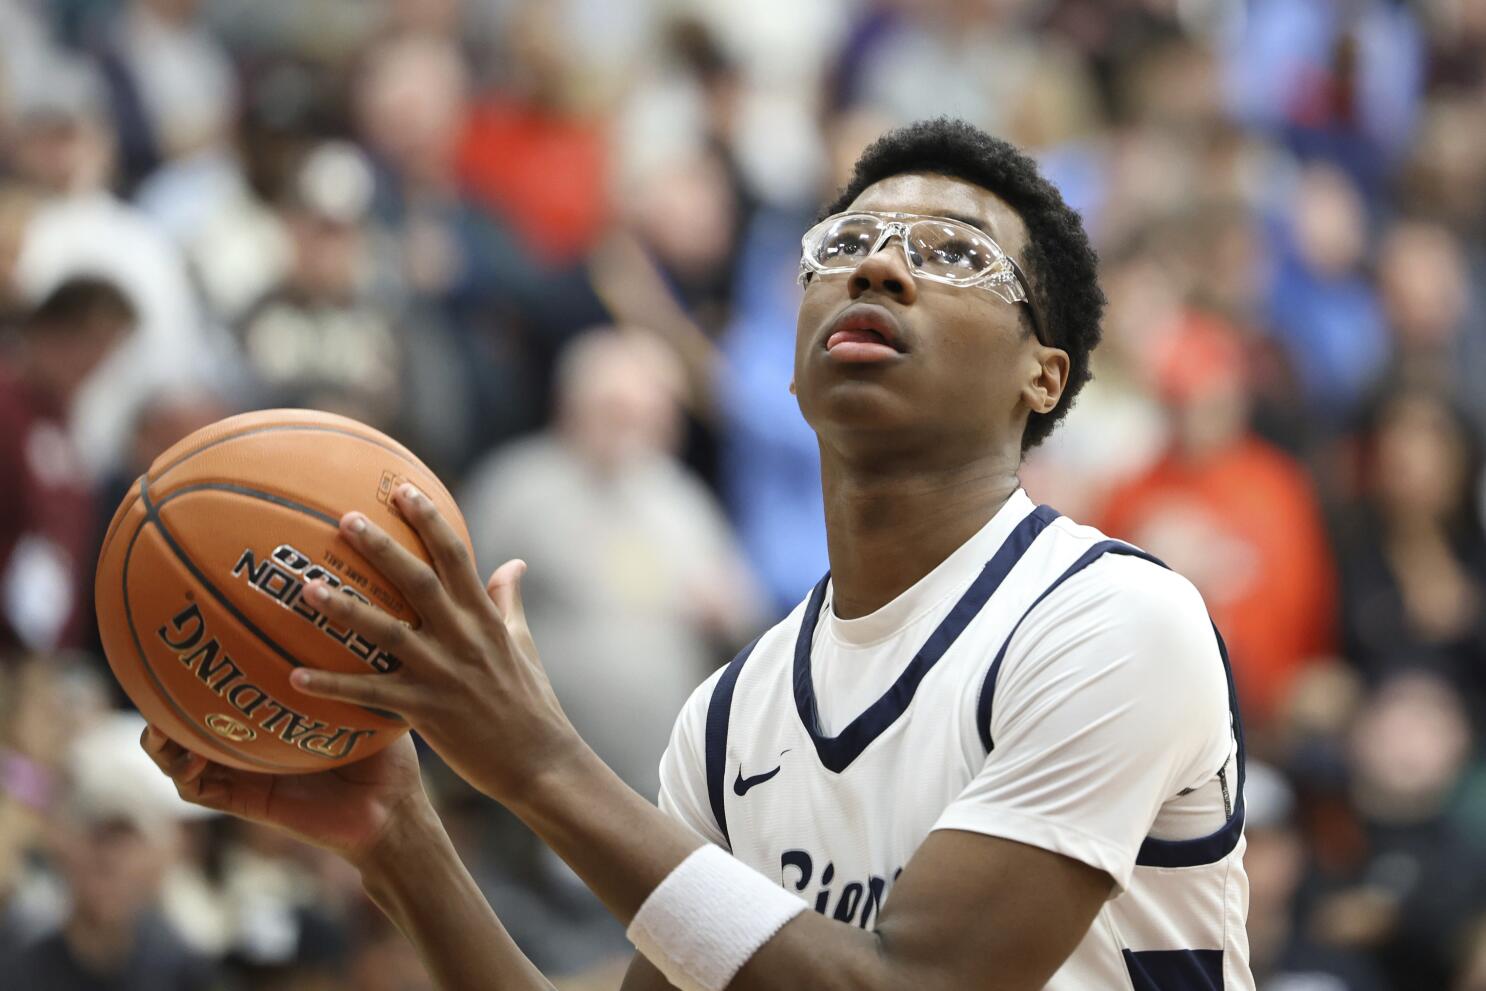 Bryce James leaving Sierra Canyon for Campbell Hall, per report